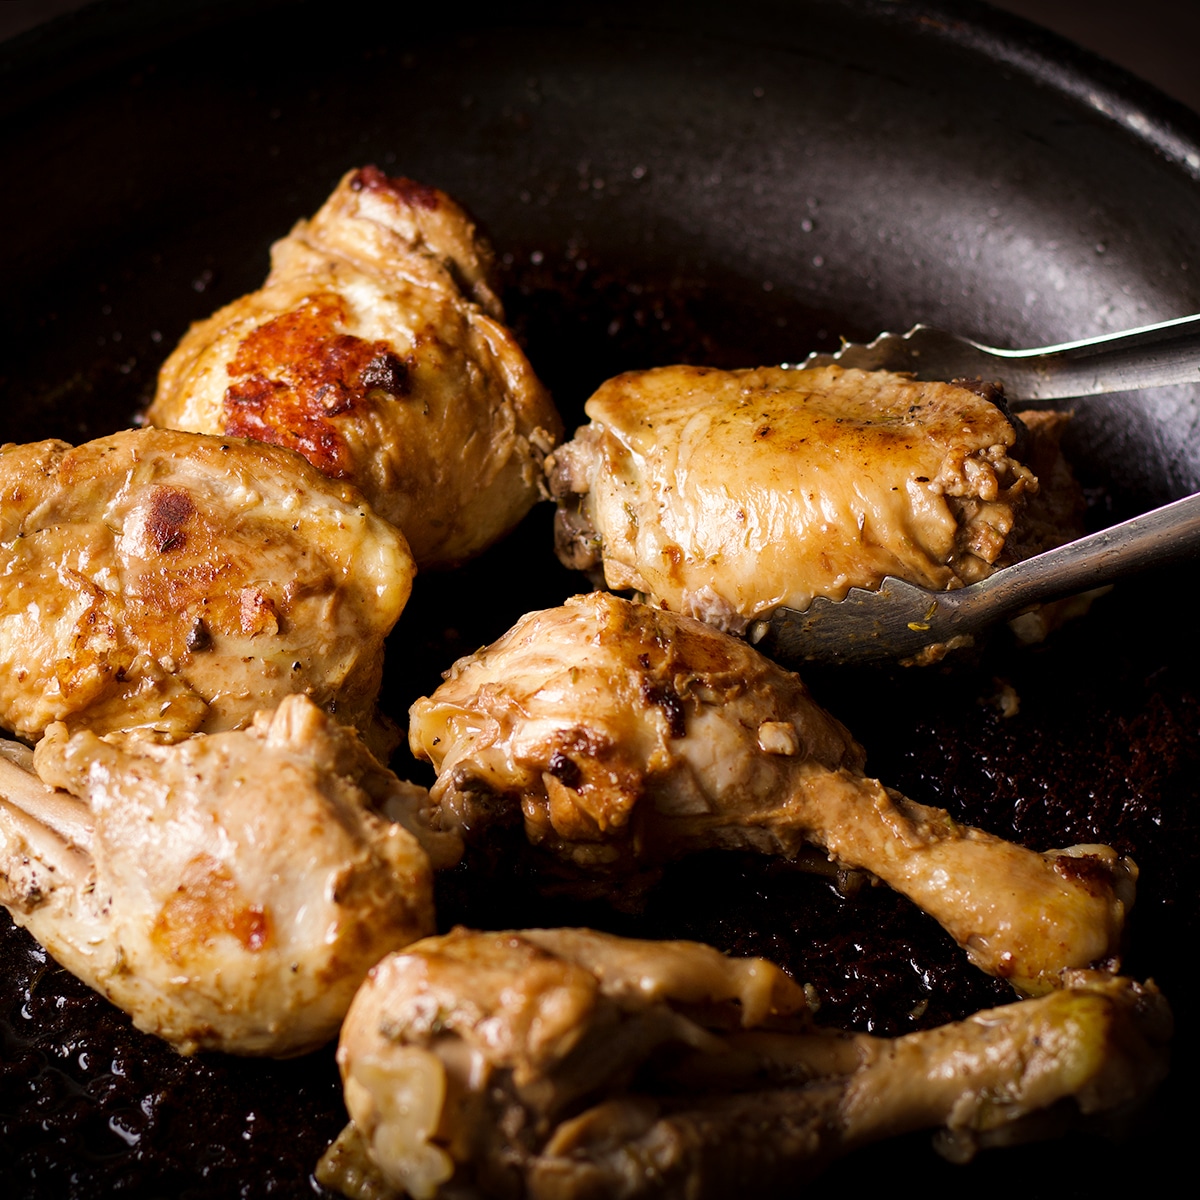 Searing pieces of chicken in a hot skillet after marinating it in filipino style coconut adobo sauce.